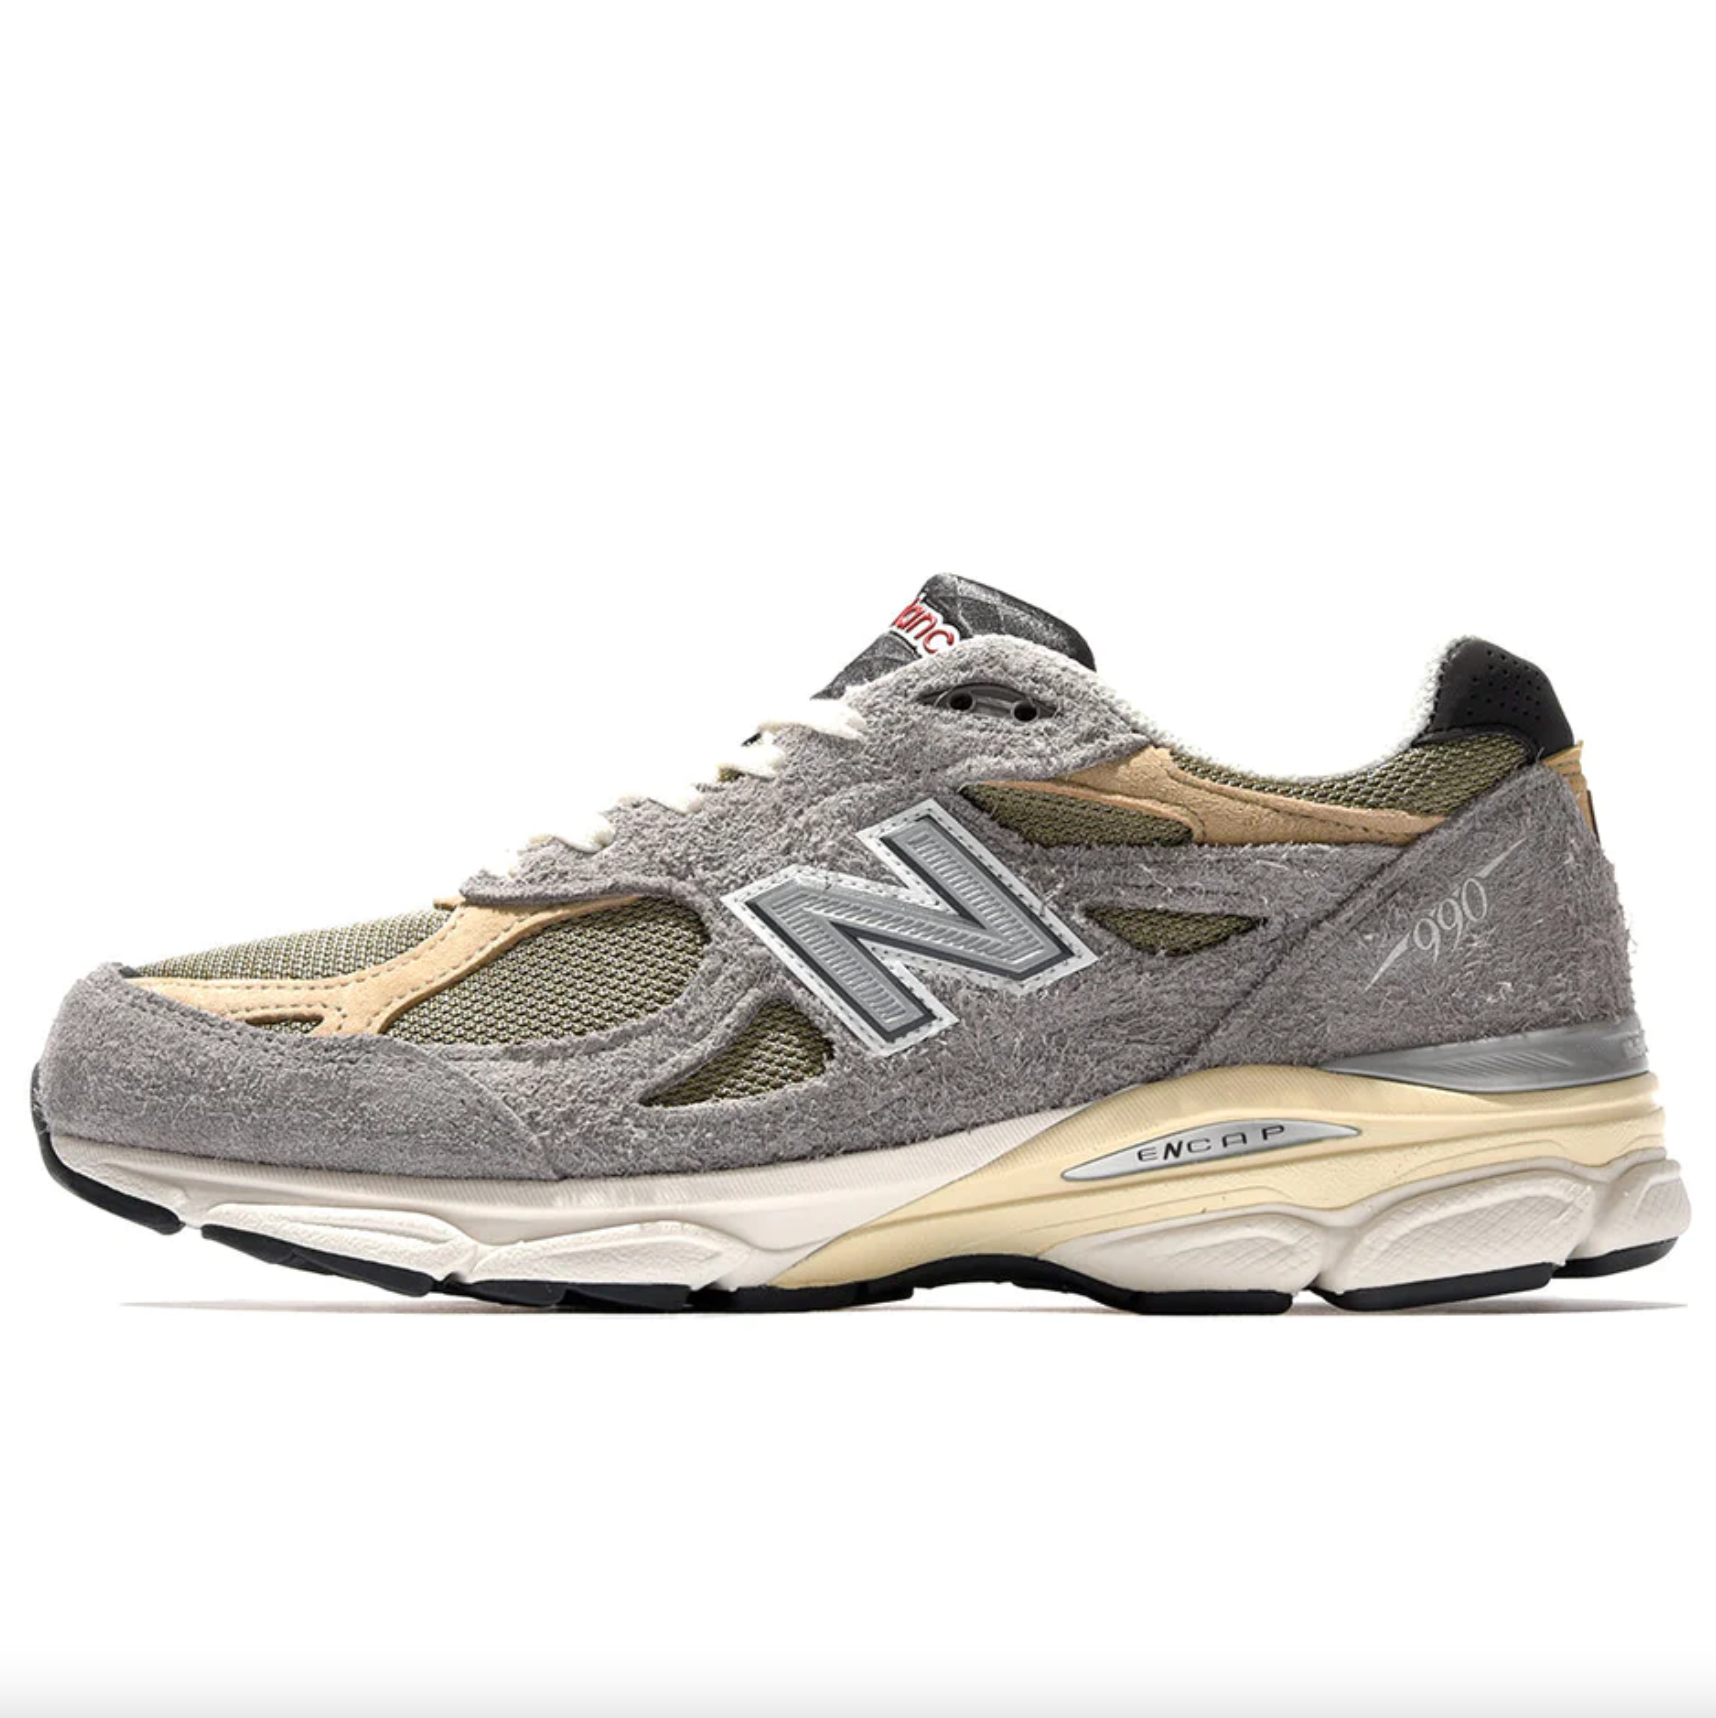 New Balance 990 Limited Edition Santis Sneakers Collection | RADPRESENT